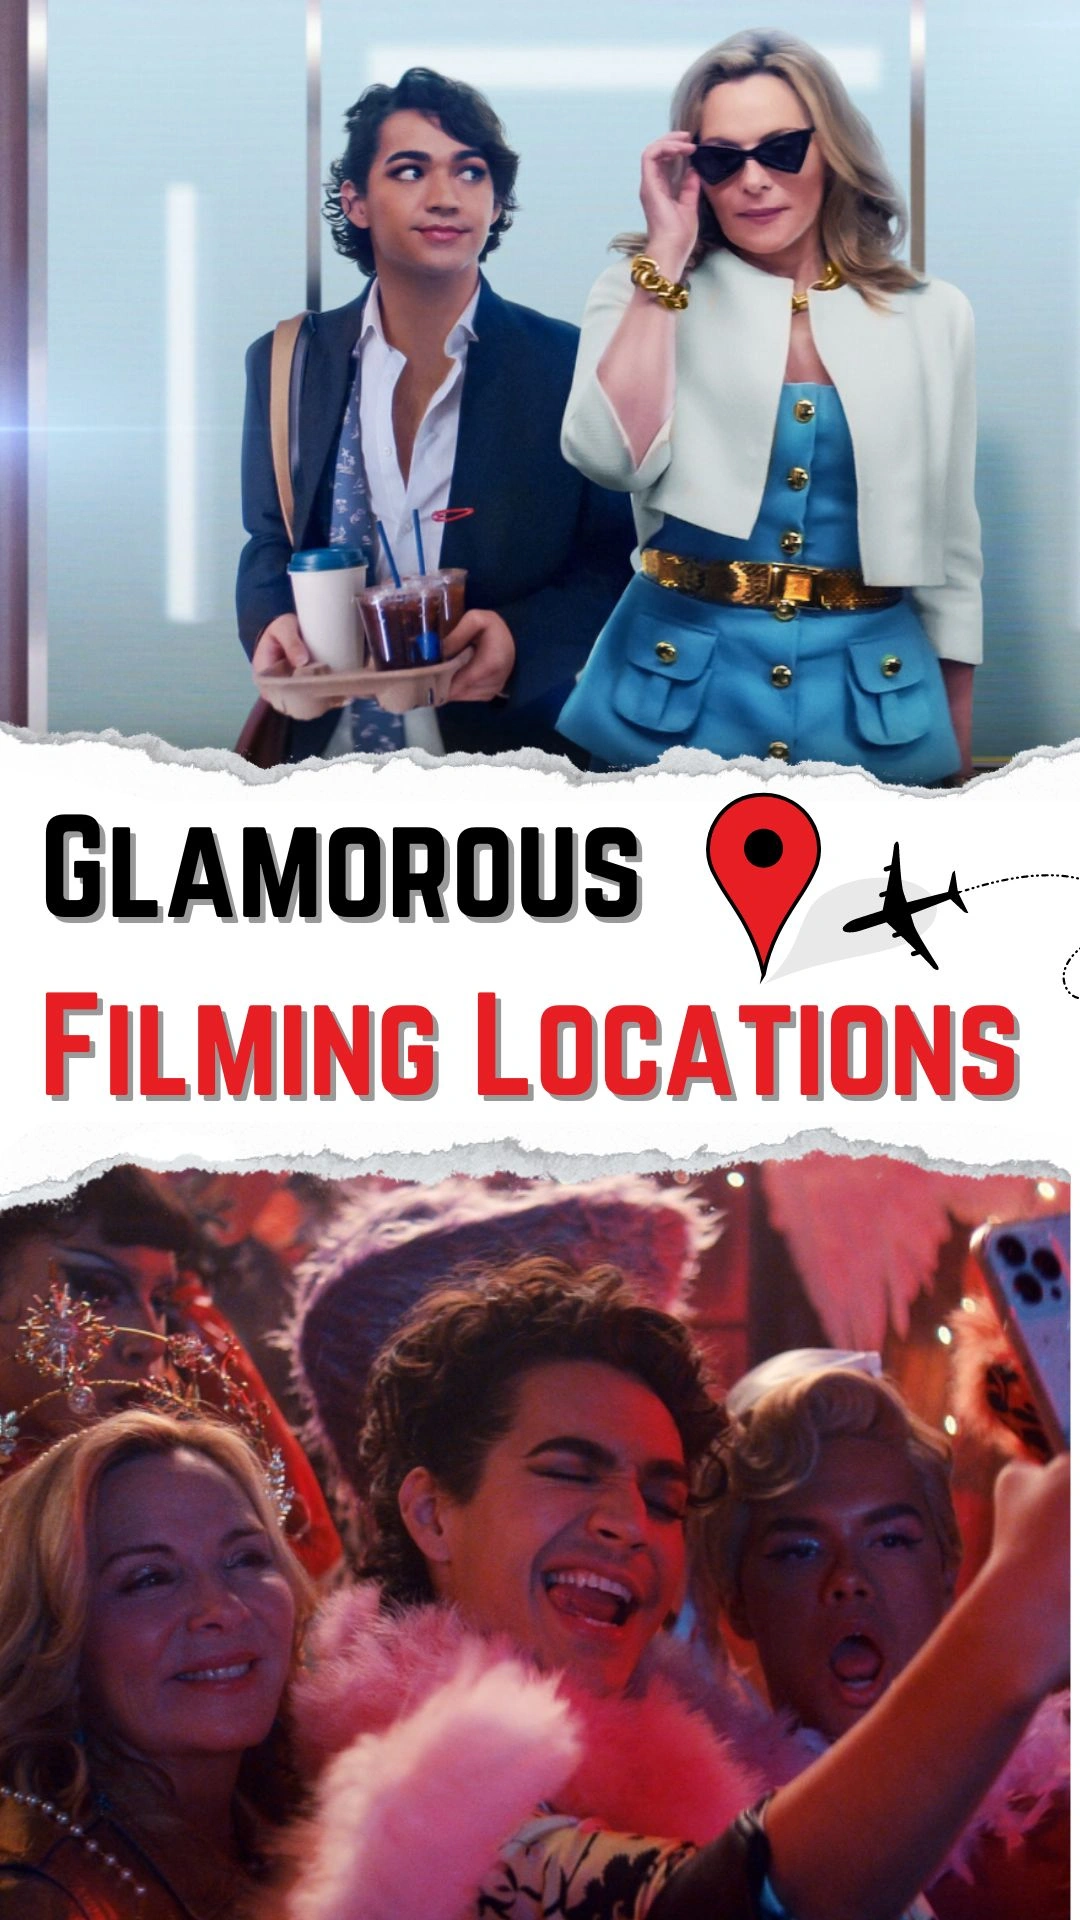 Glamorous Filming Locations